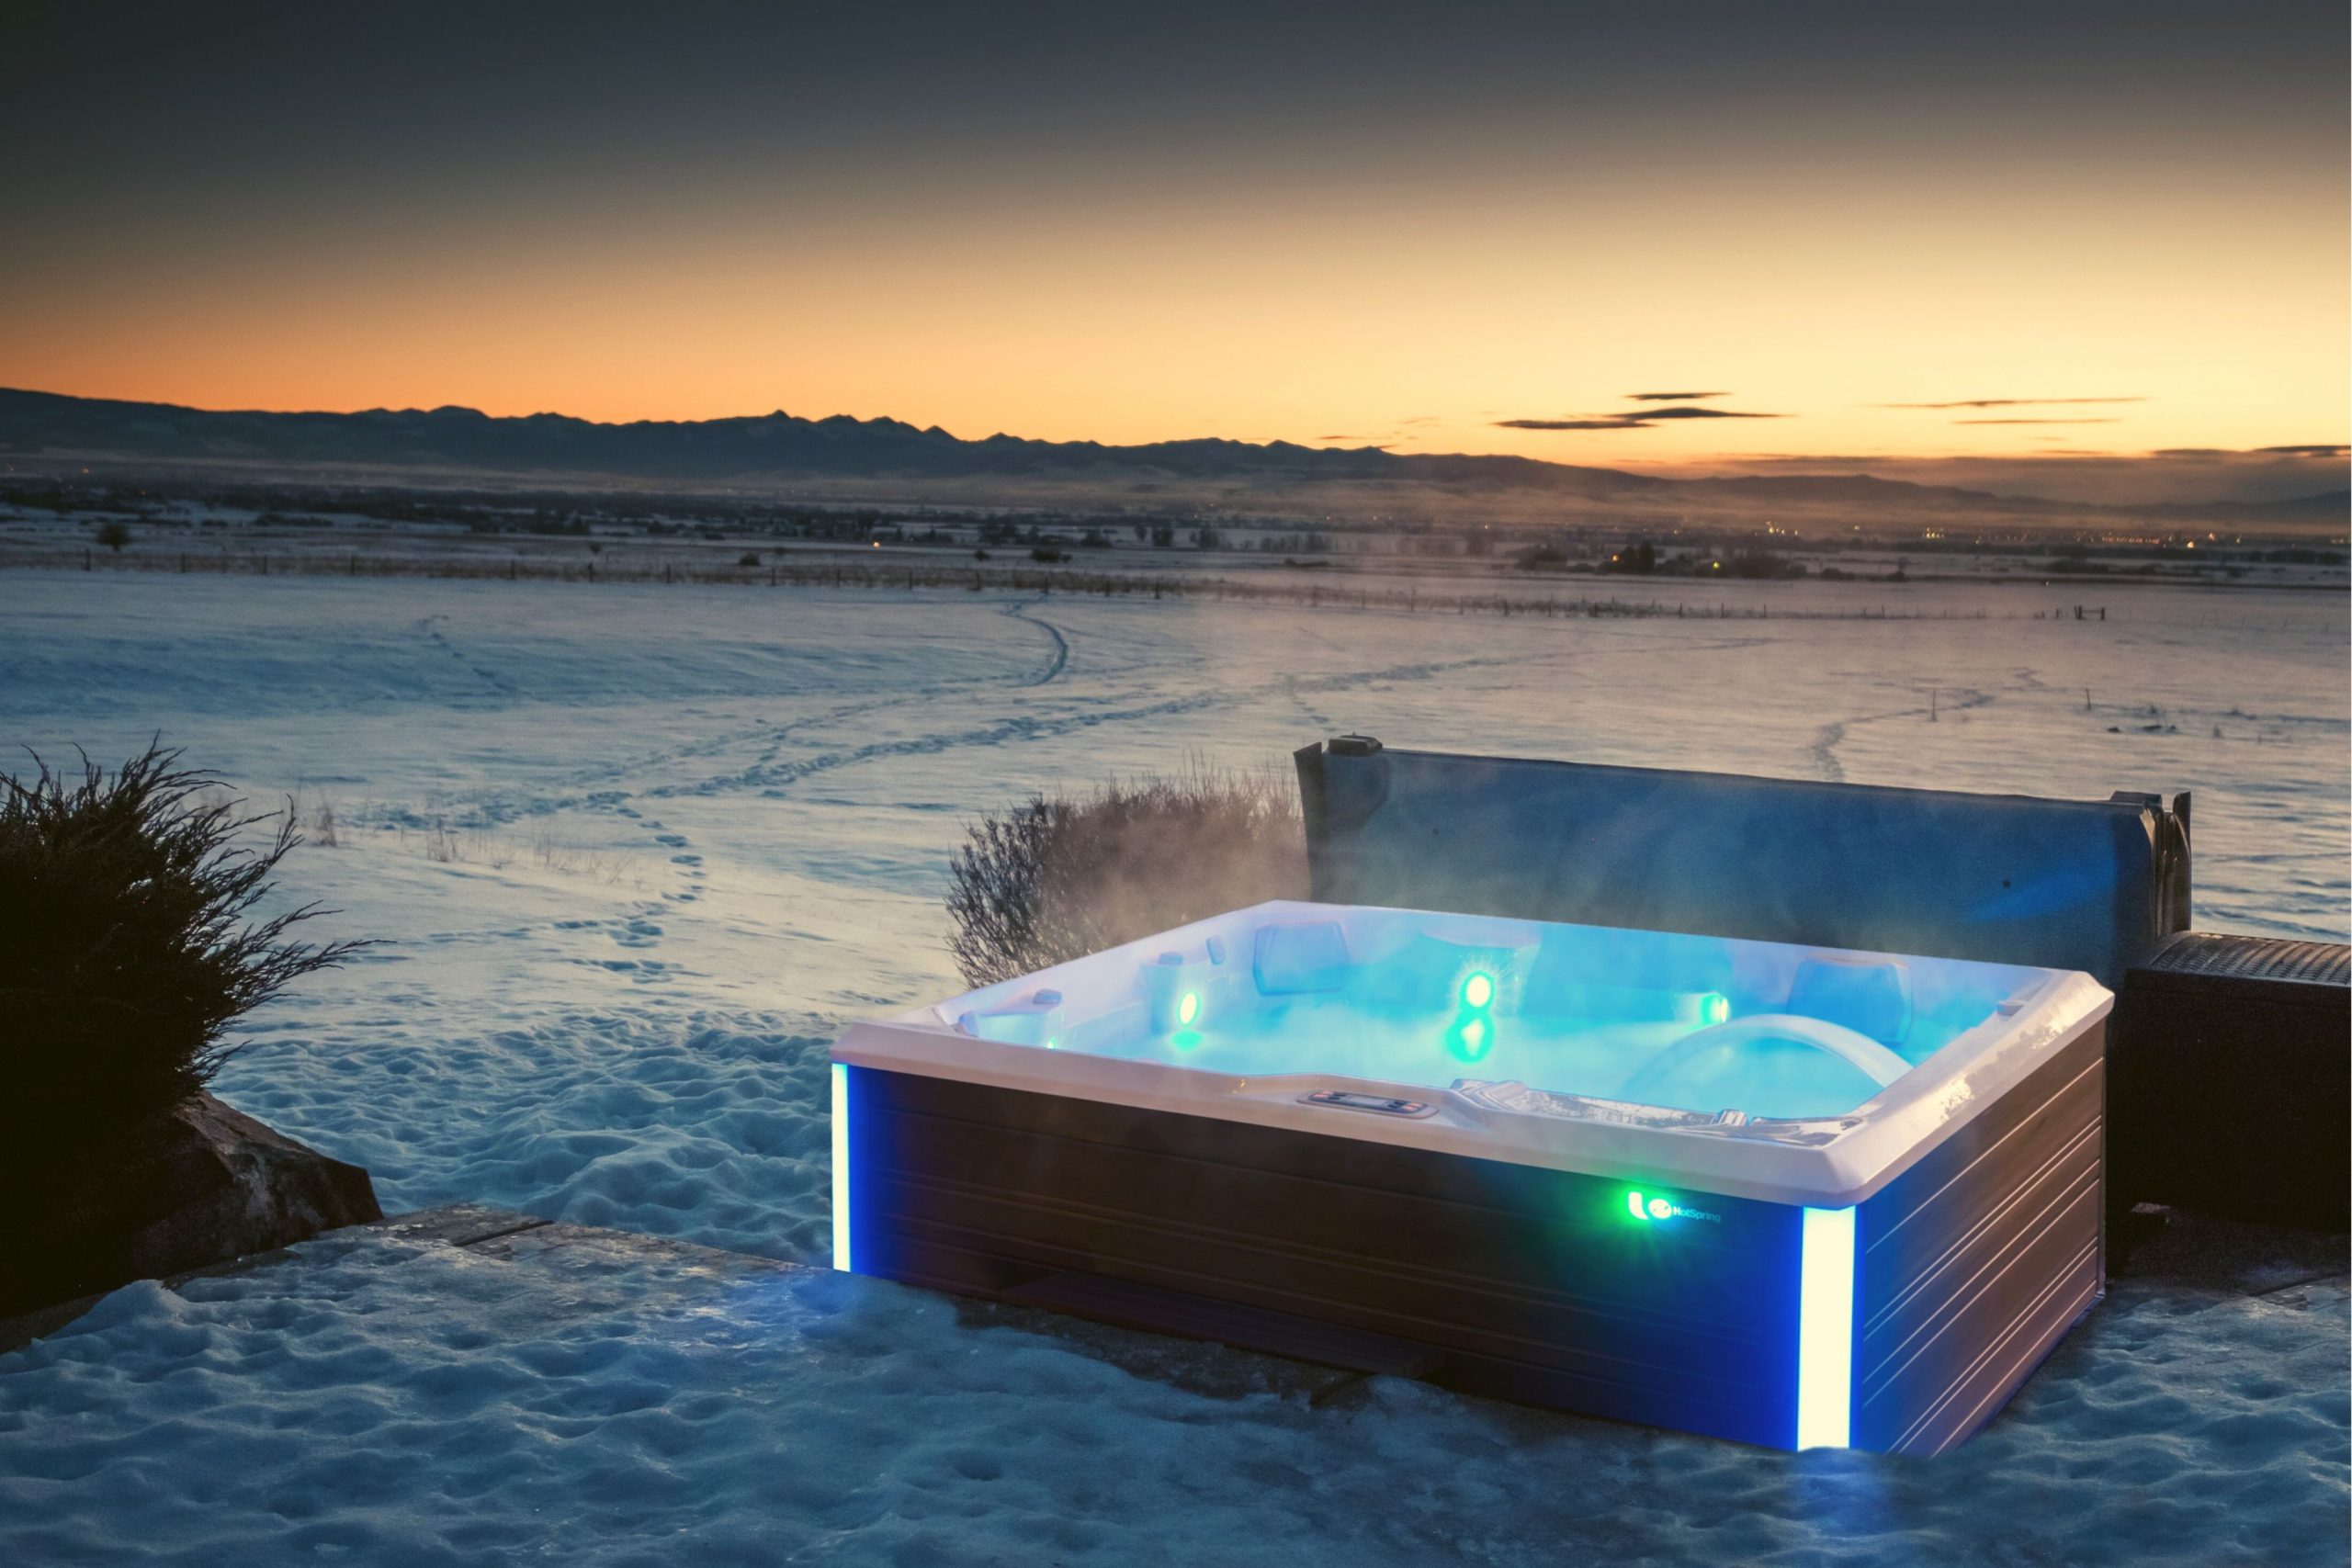 The Surprising Ways a Hot Tub Can Help Vanquish the Winter Blues